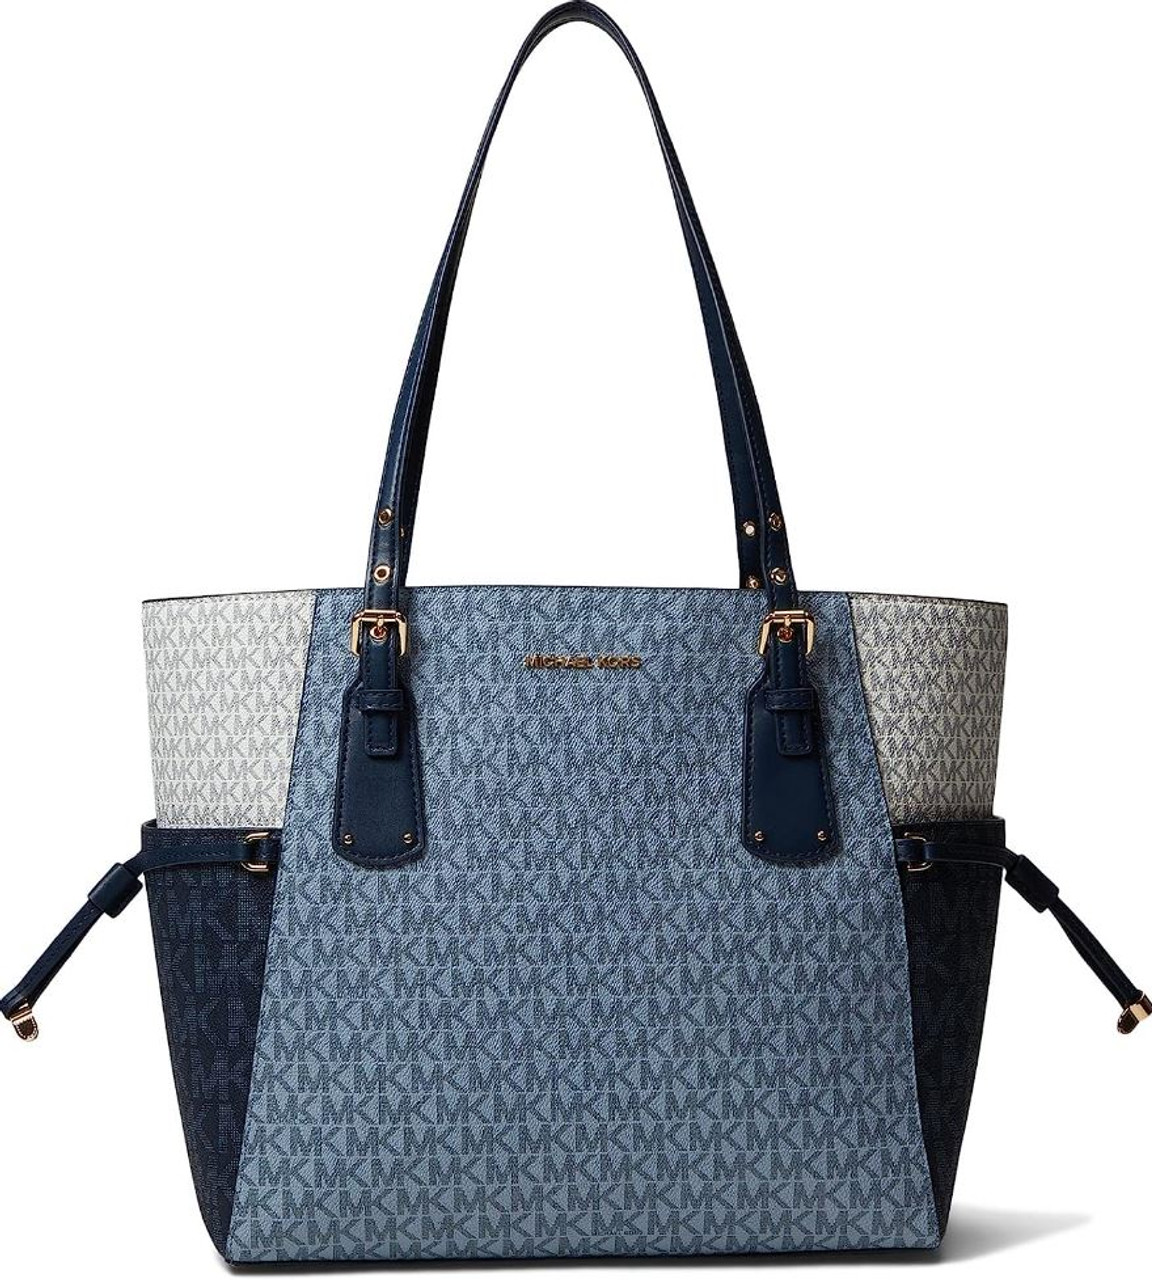 Michael Kors Voyager East/West Tote Navy/White/Pale Blue One Size  30S0GV6T4V-436 - AllGlitters